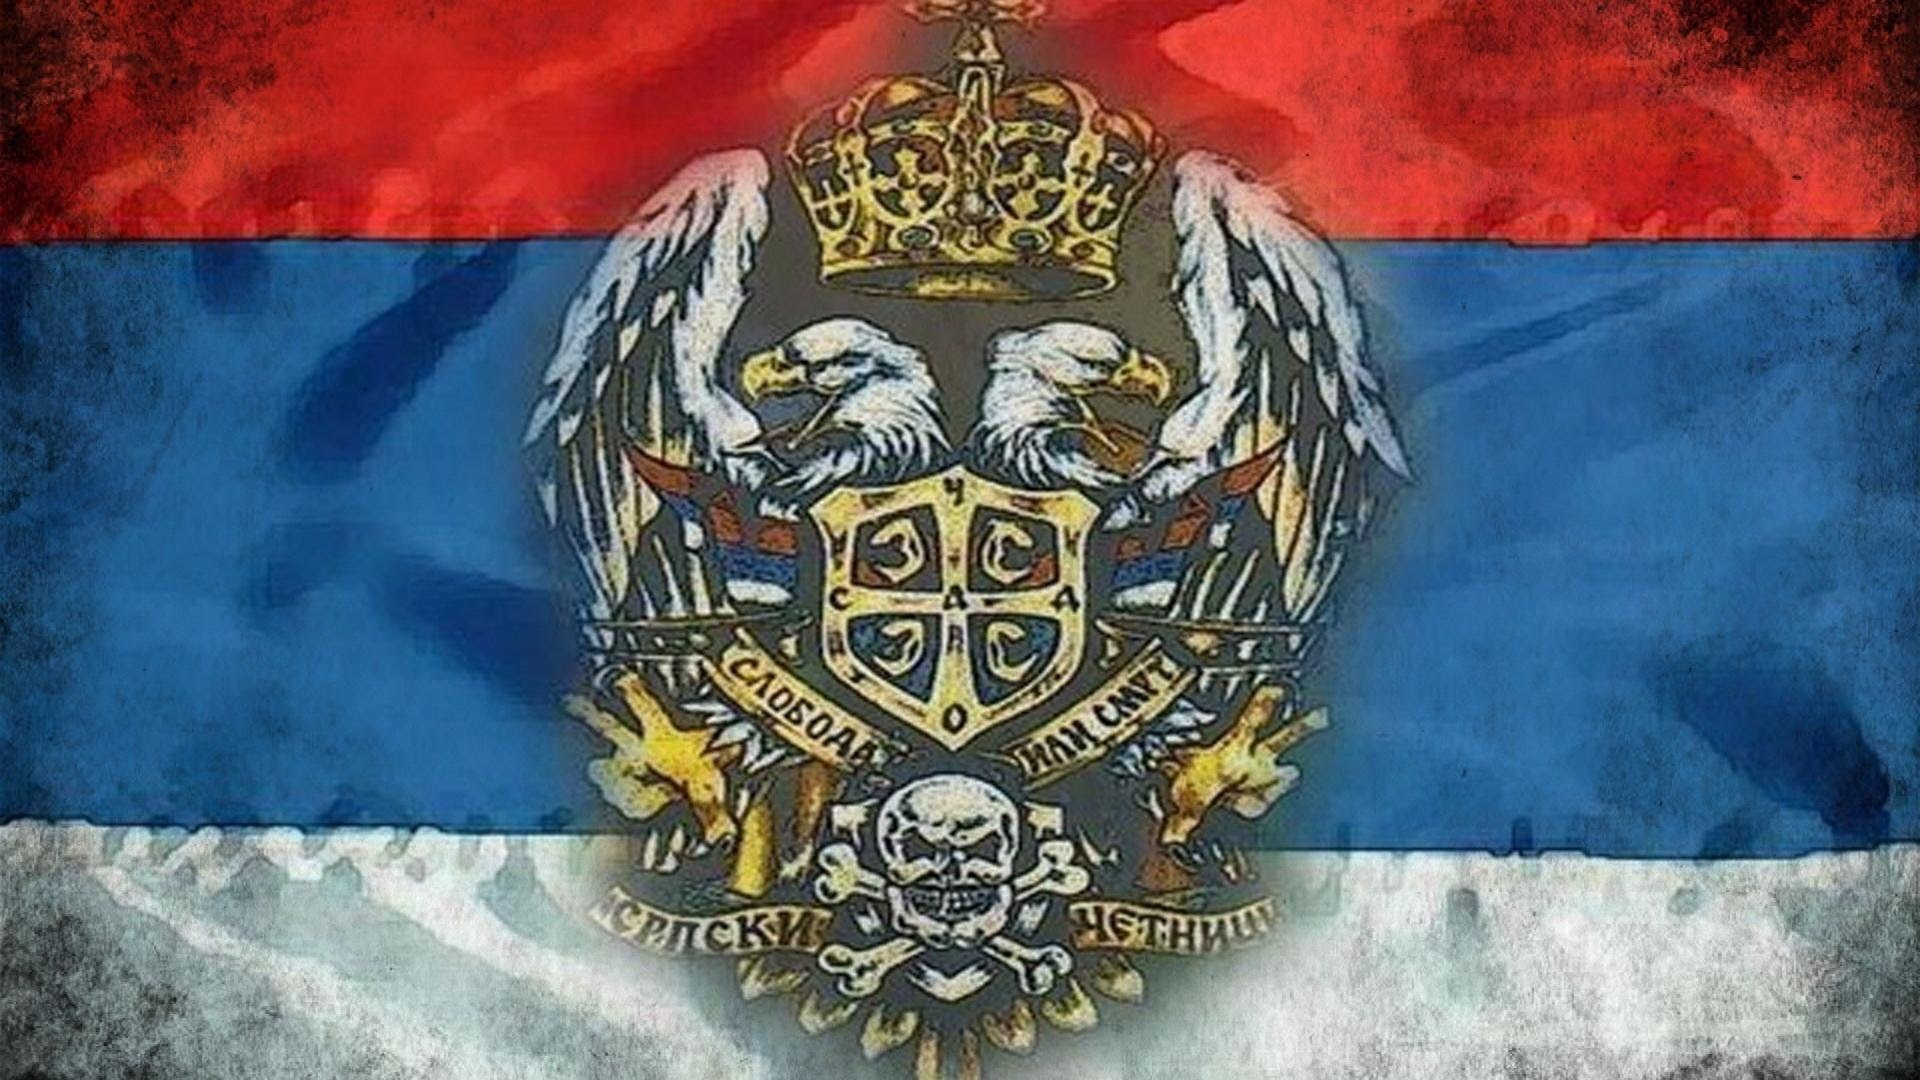 Serbia Wallpaper 68 Pictures